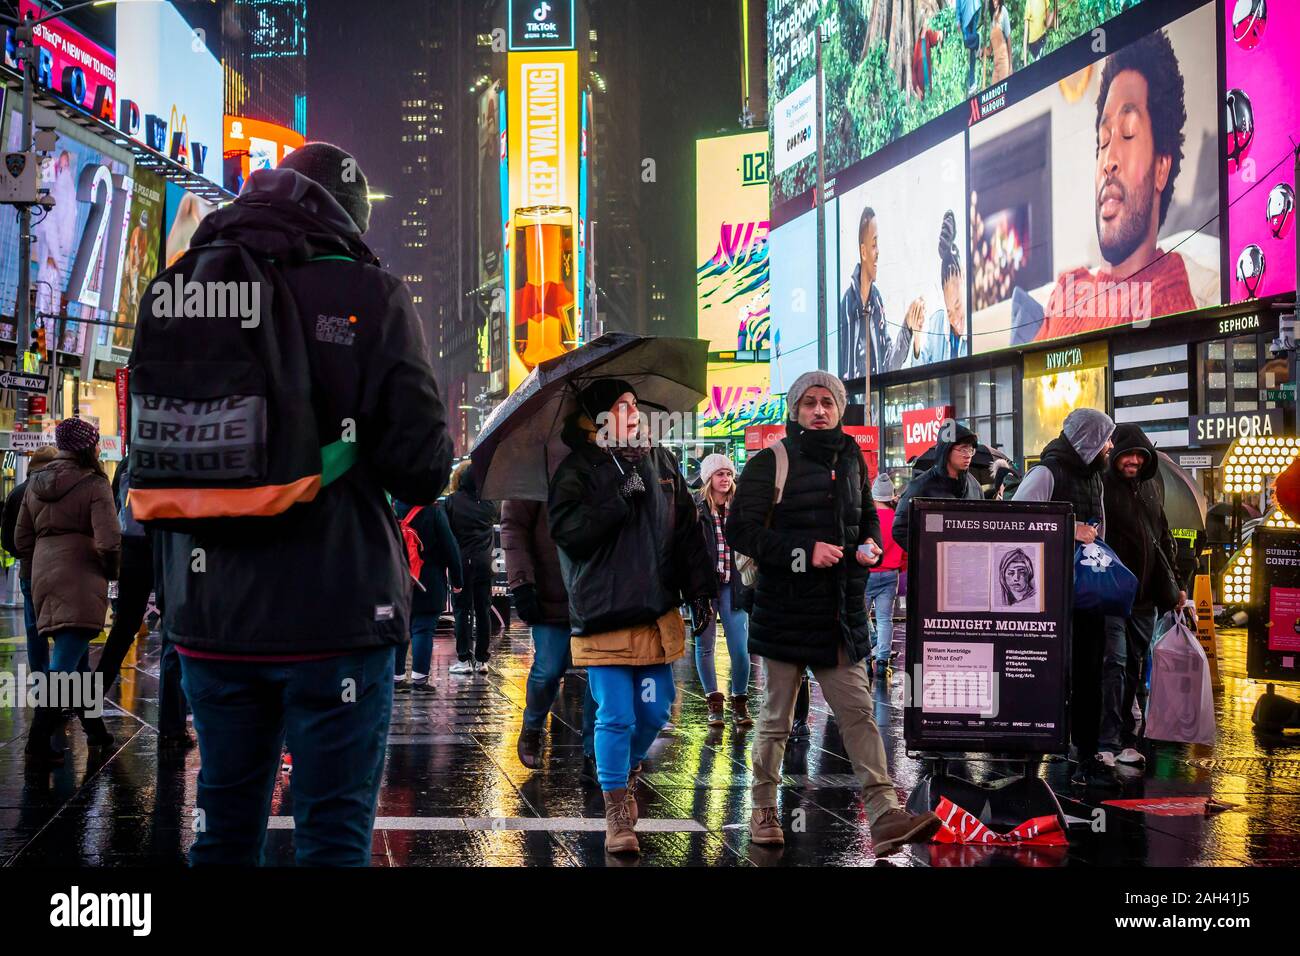 Hordes of tourists descend on a rainy Times Square in New York on Tuesday, December 17, 2019 prior to Christmas (© Richard B. Levine) Stock Photo